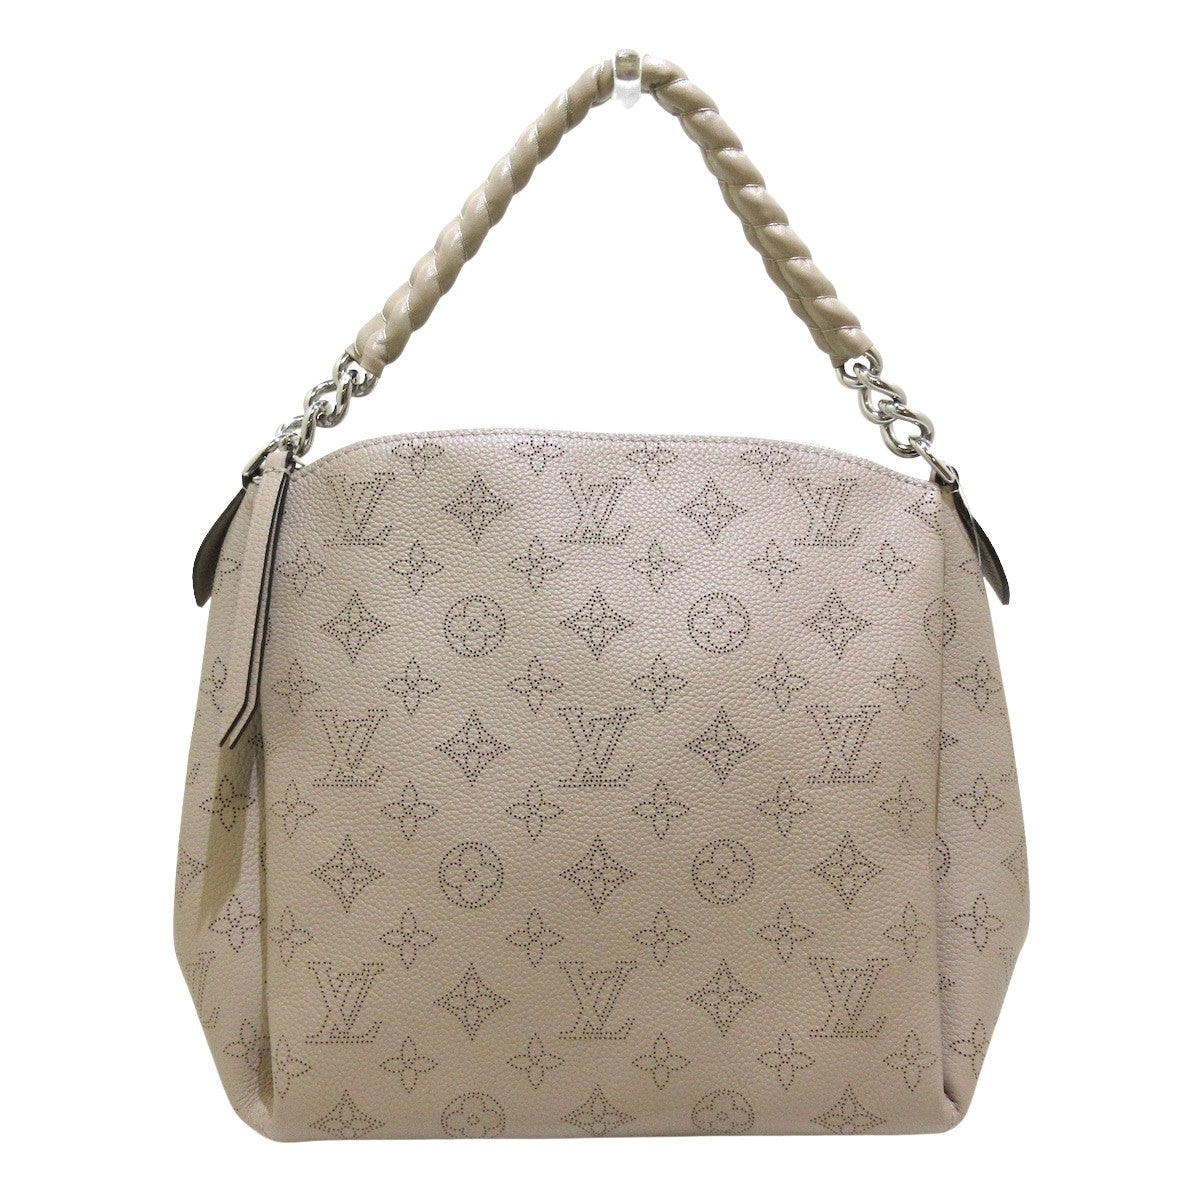 Pre-Owned Louis Vuitton Babylone Tote 